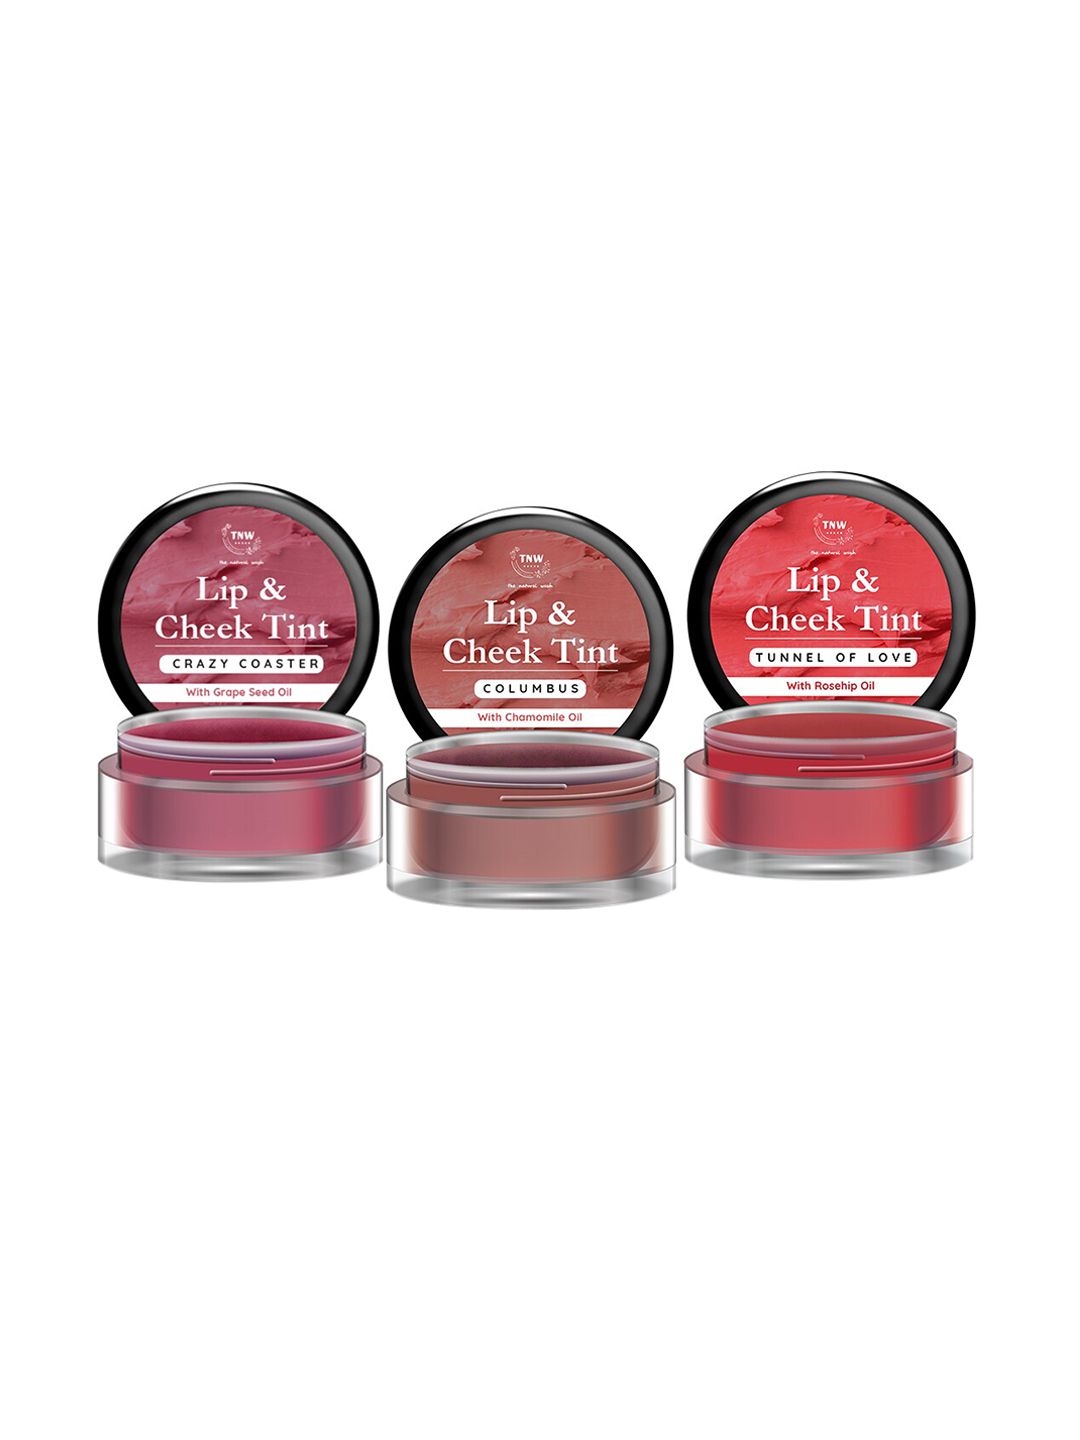 TNW the natural wash Set of 3 Lip & Cheek Tint - Crazy Coaster, Columbus, Tunnel Of Love Price in India